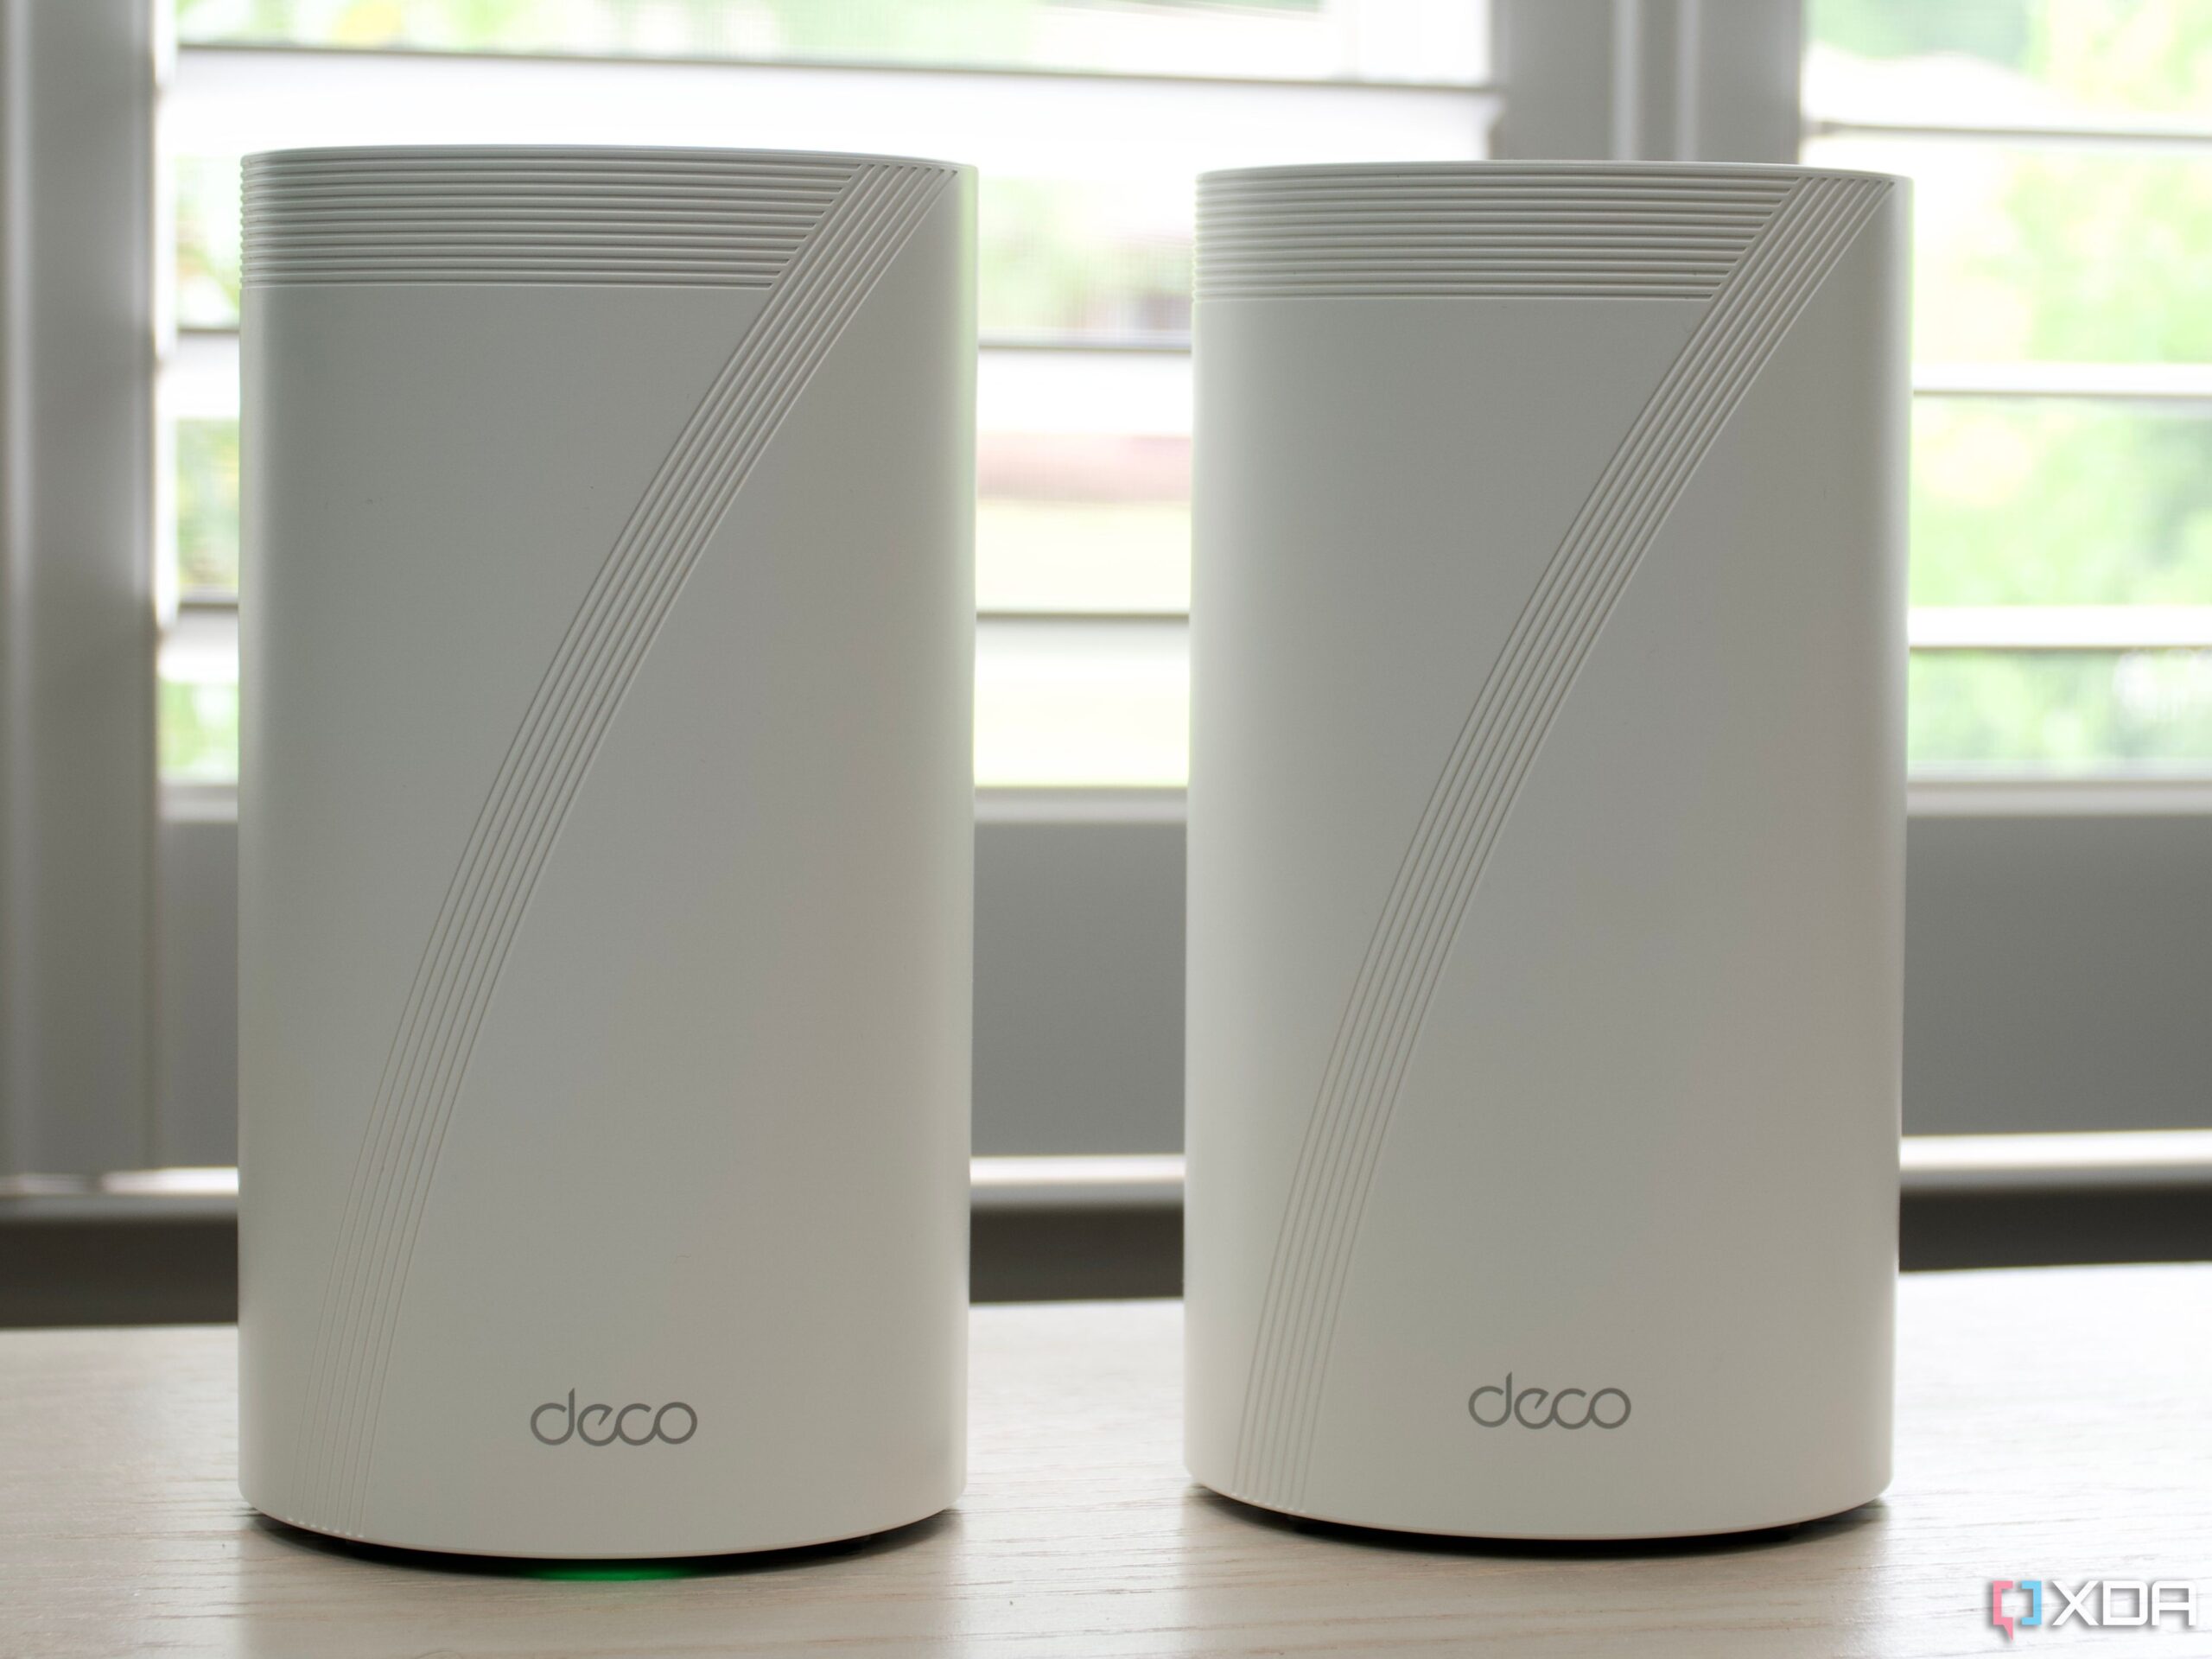 tp-link-deco-be85-wi-fi-7-mesh-review:-ultra-fast-wi-fi-you-can-set-up-with-an-app